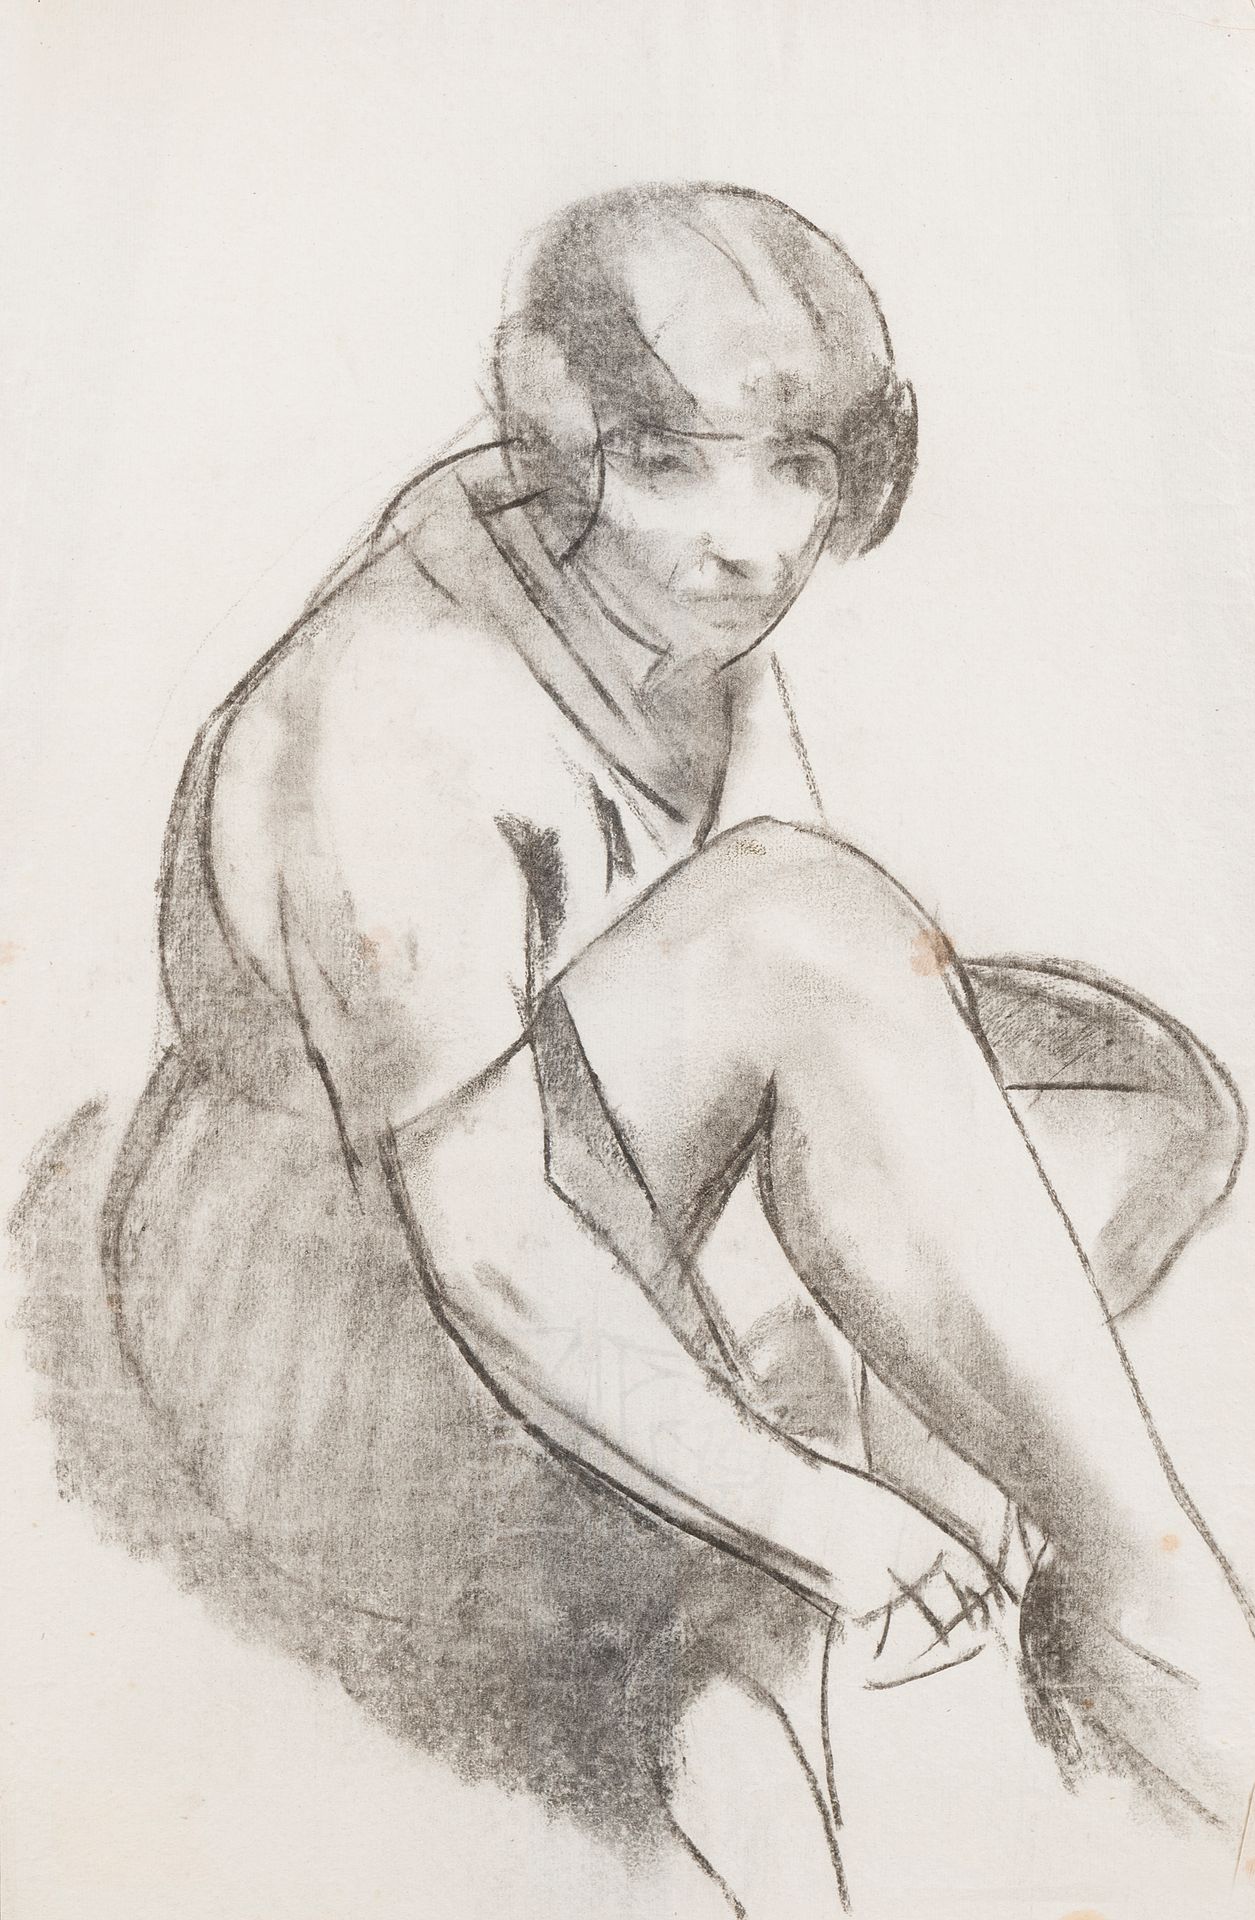 Null Charles PICART LE DOUX (1881-1959)
Seated woman, 1924
Charcoal
50 x 33 cm